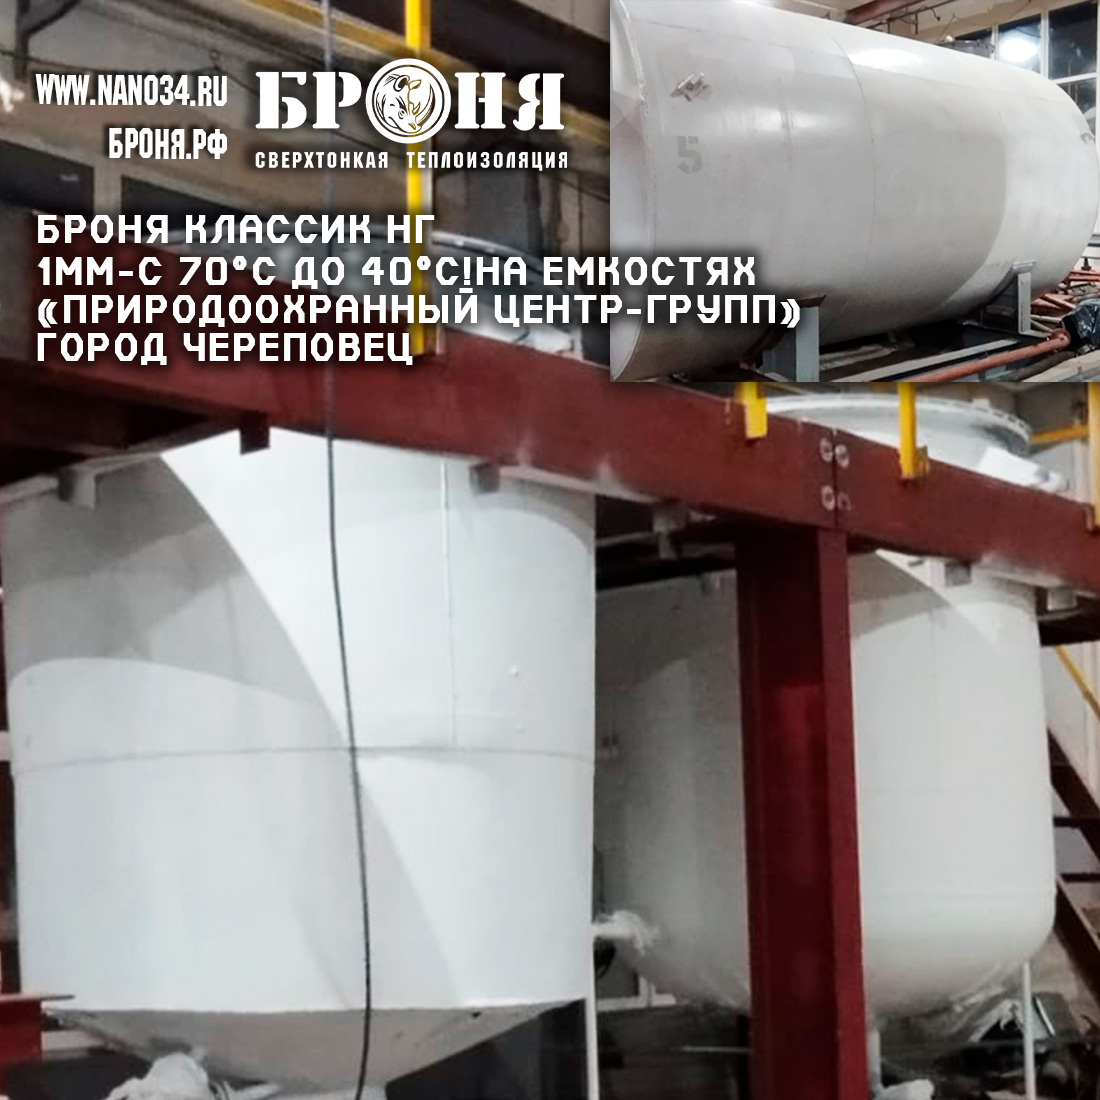 "Bronya Classic NF is only 1mm, and from +70°C to +40°C!"ON THE TANKS OF THE ENVIRONMENTAL CENTER "NATURE CONSERVATION CENTER-GROUP", Cherepovets, Vologda region (photo)